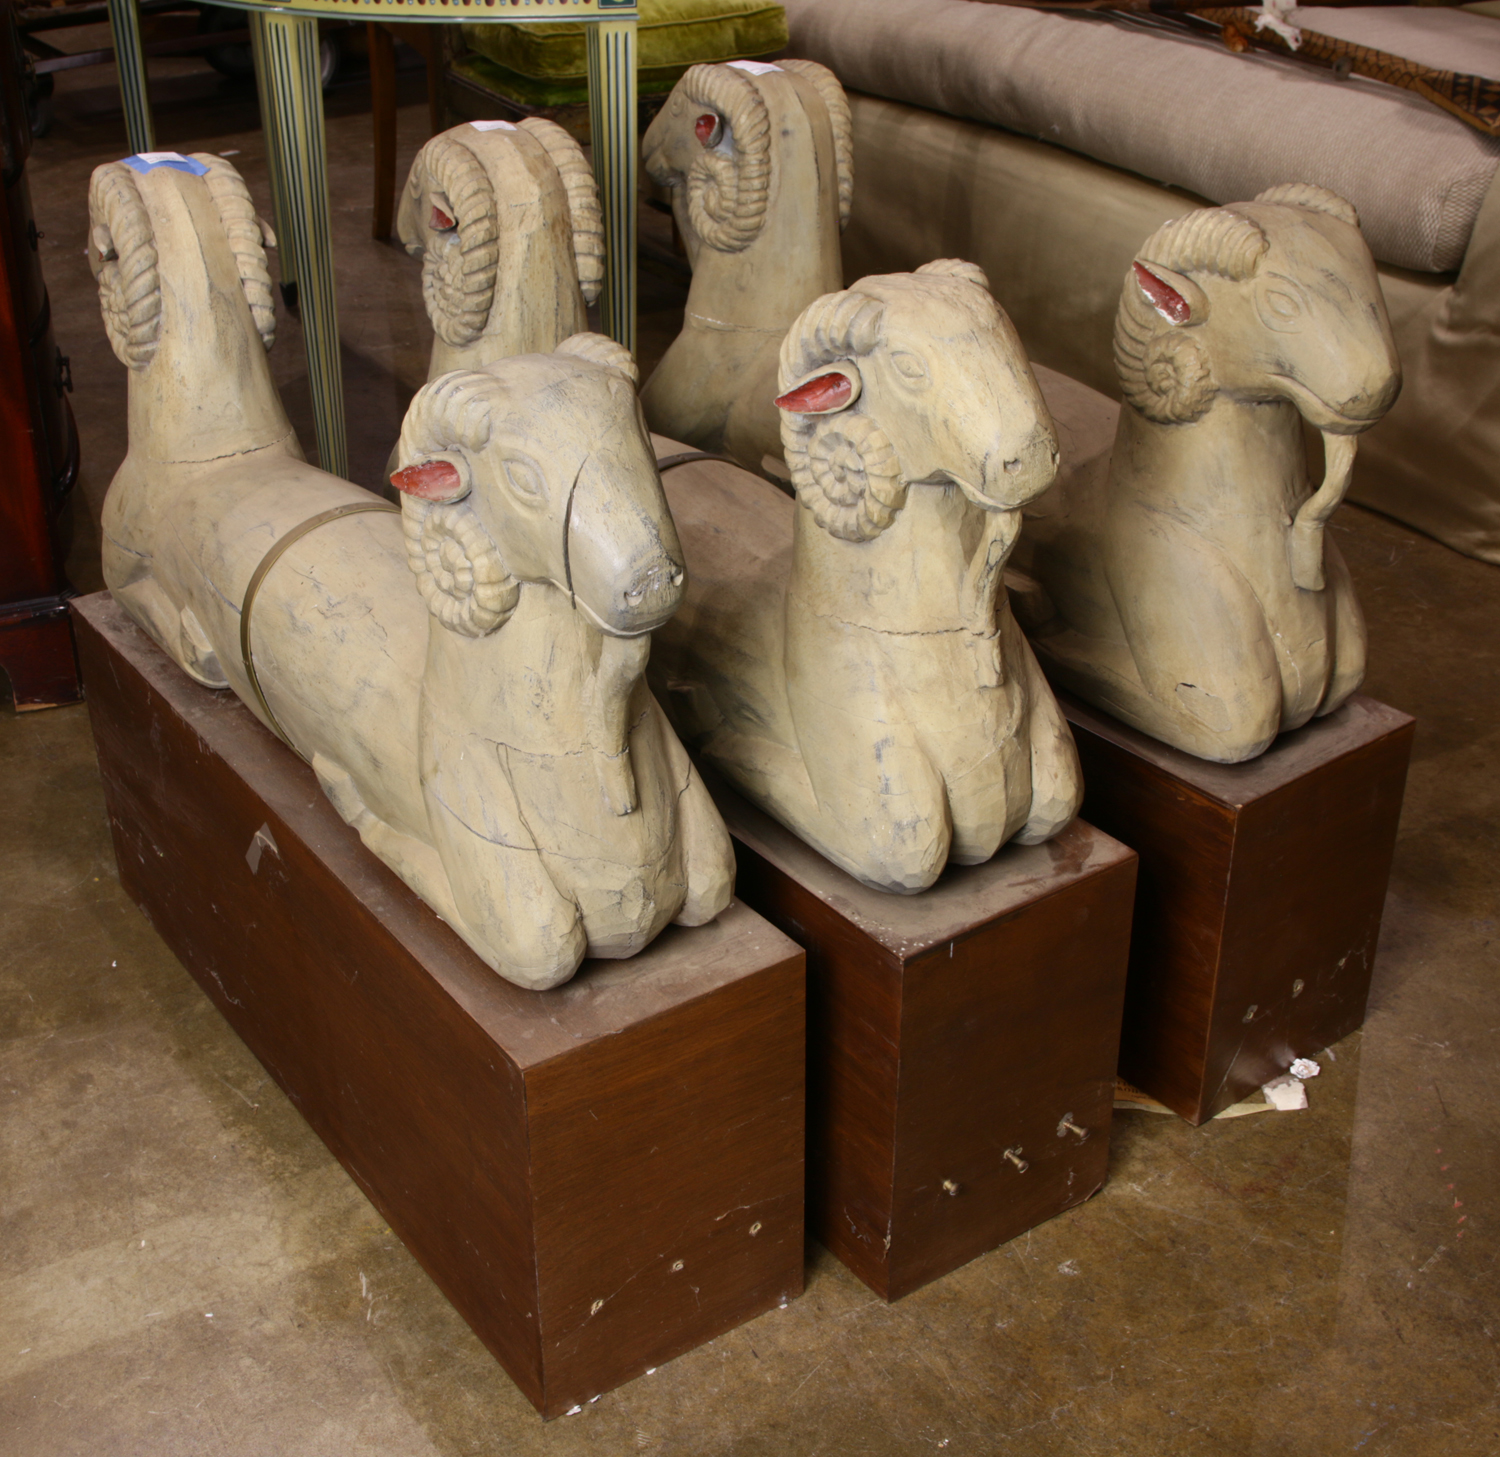  LOT OF 3 CARVED RAM FORM FURNITURE 3a6695